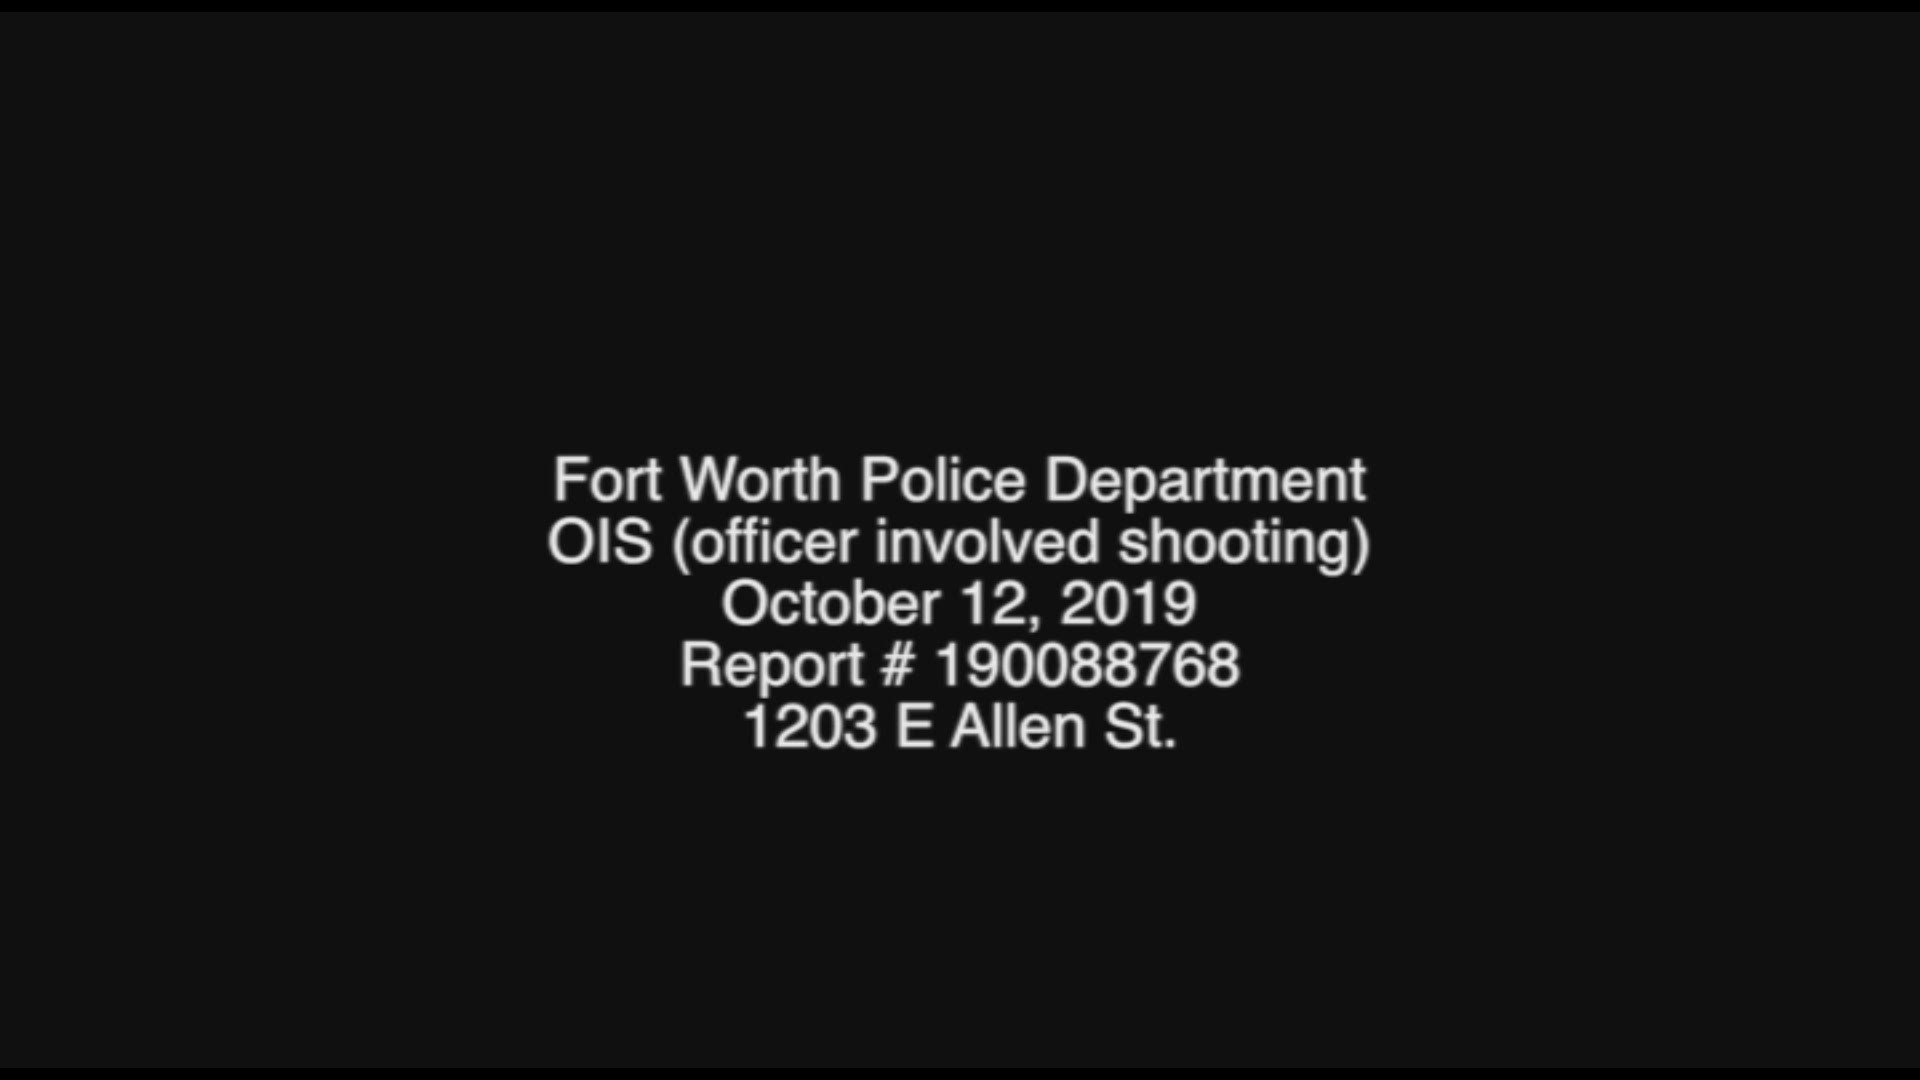 Fort Worth police released body cam footage from an incident early Saturday. An officer responding to a call shot through the window of a house, police said.